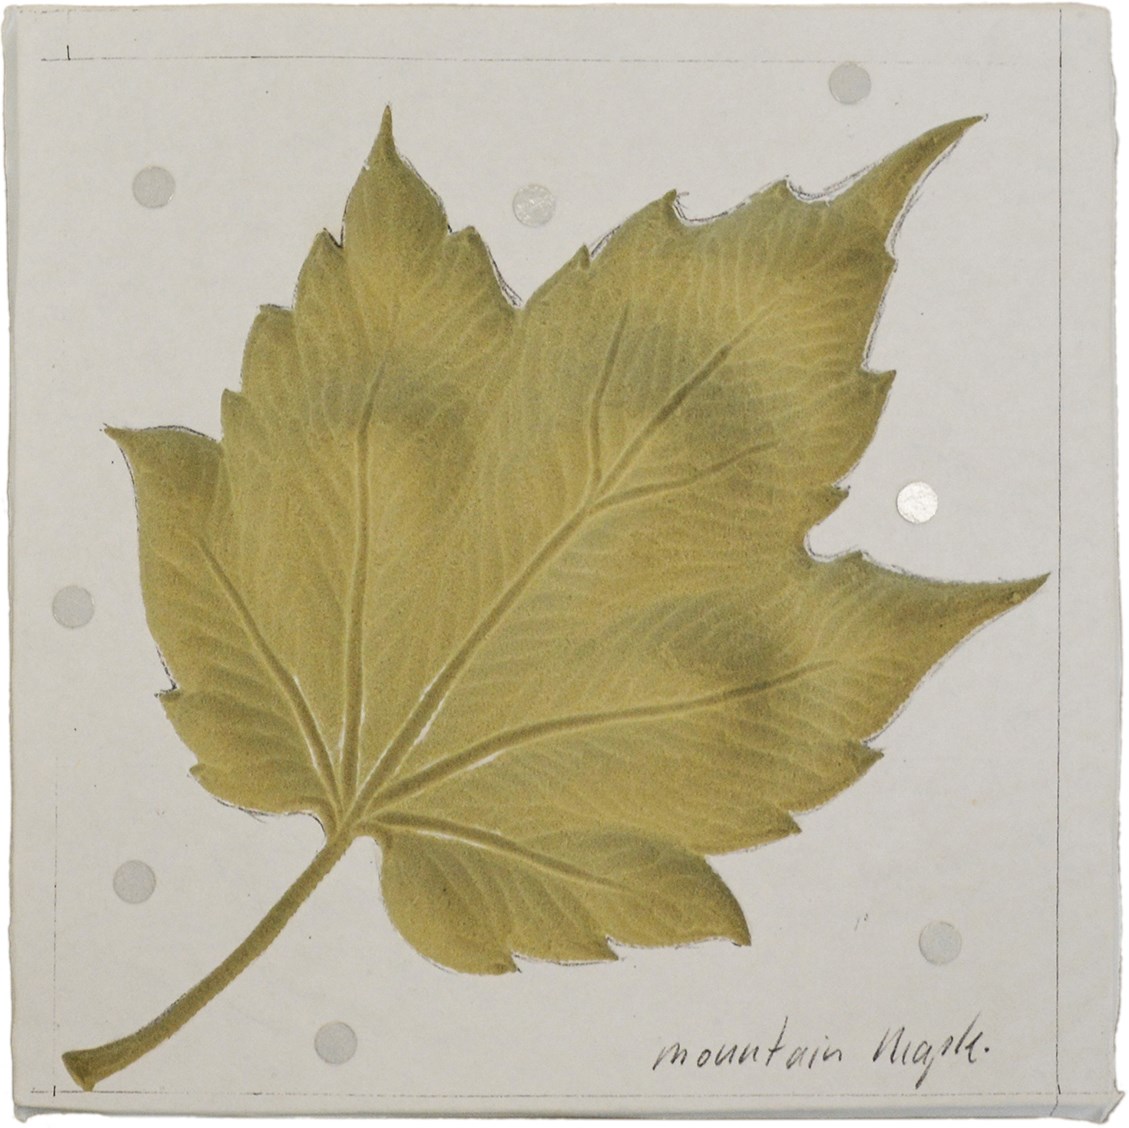 One of a series of maple-leaf emblems that will recur throughout the new Senate chamber when it moves to its temporary location in 2018. This one depicts the mountain maple.